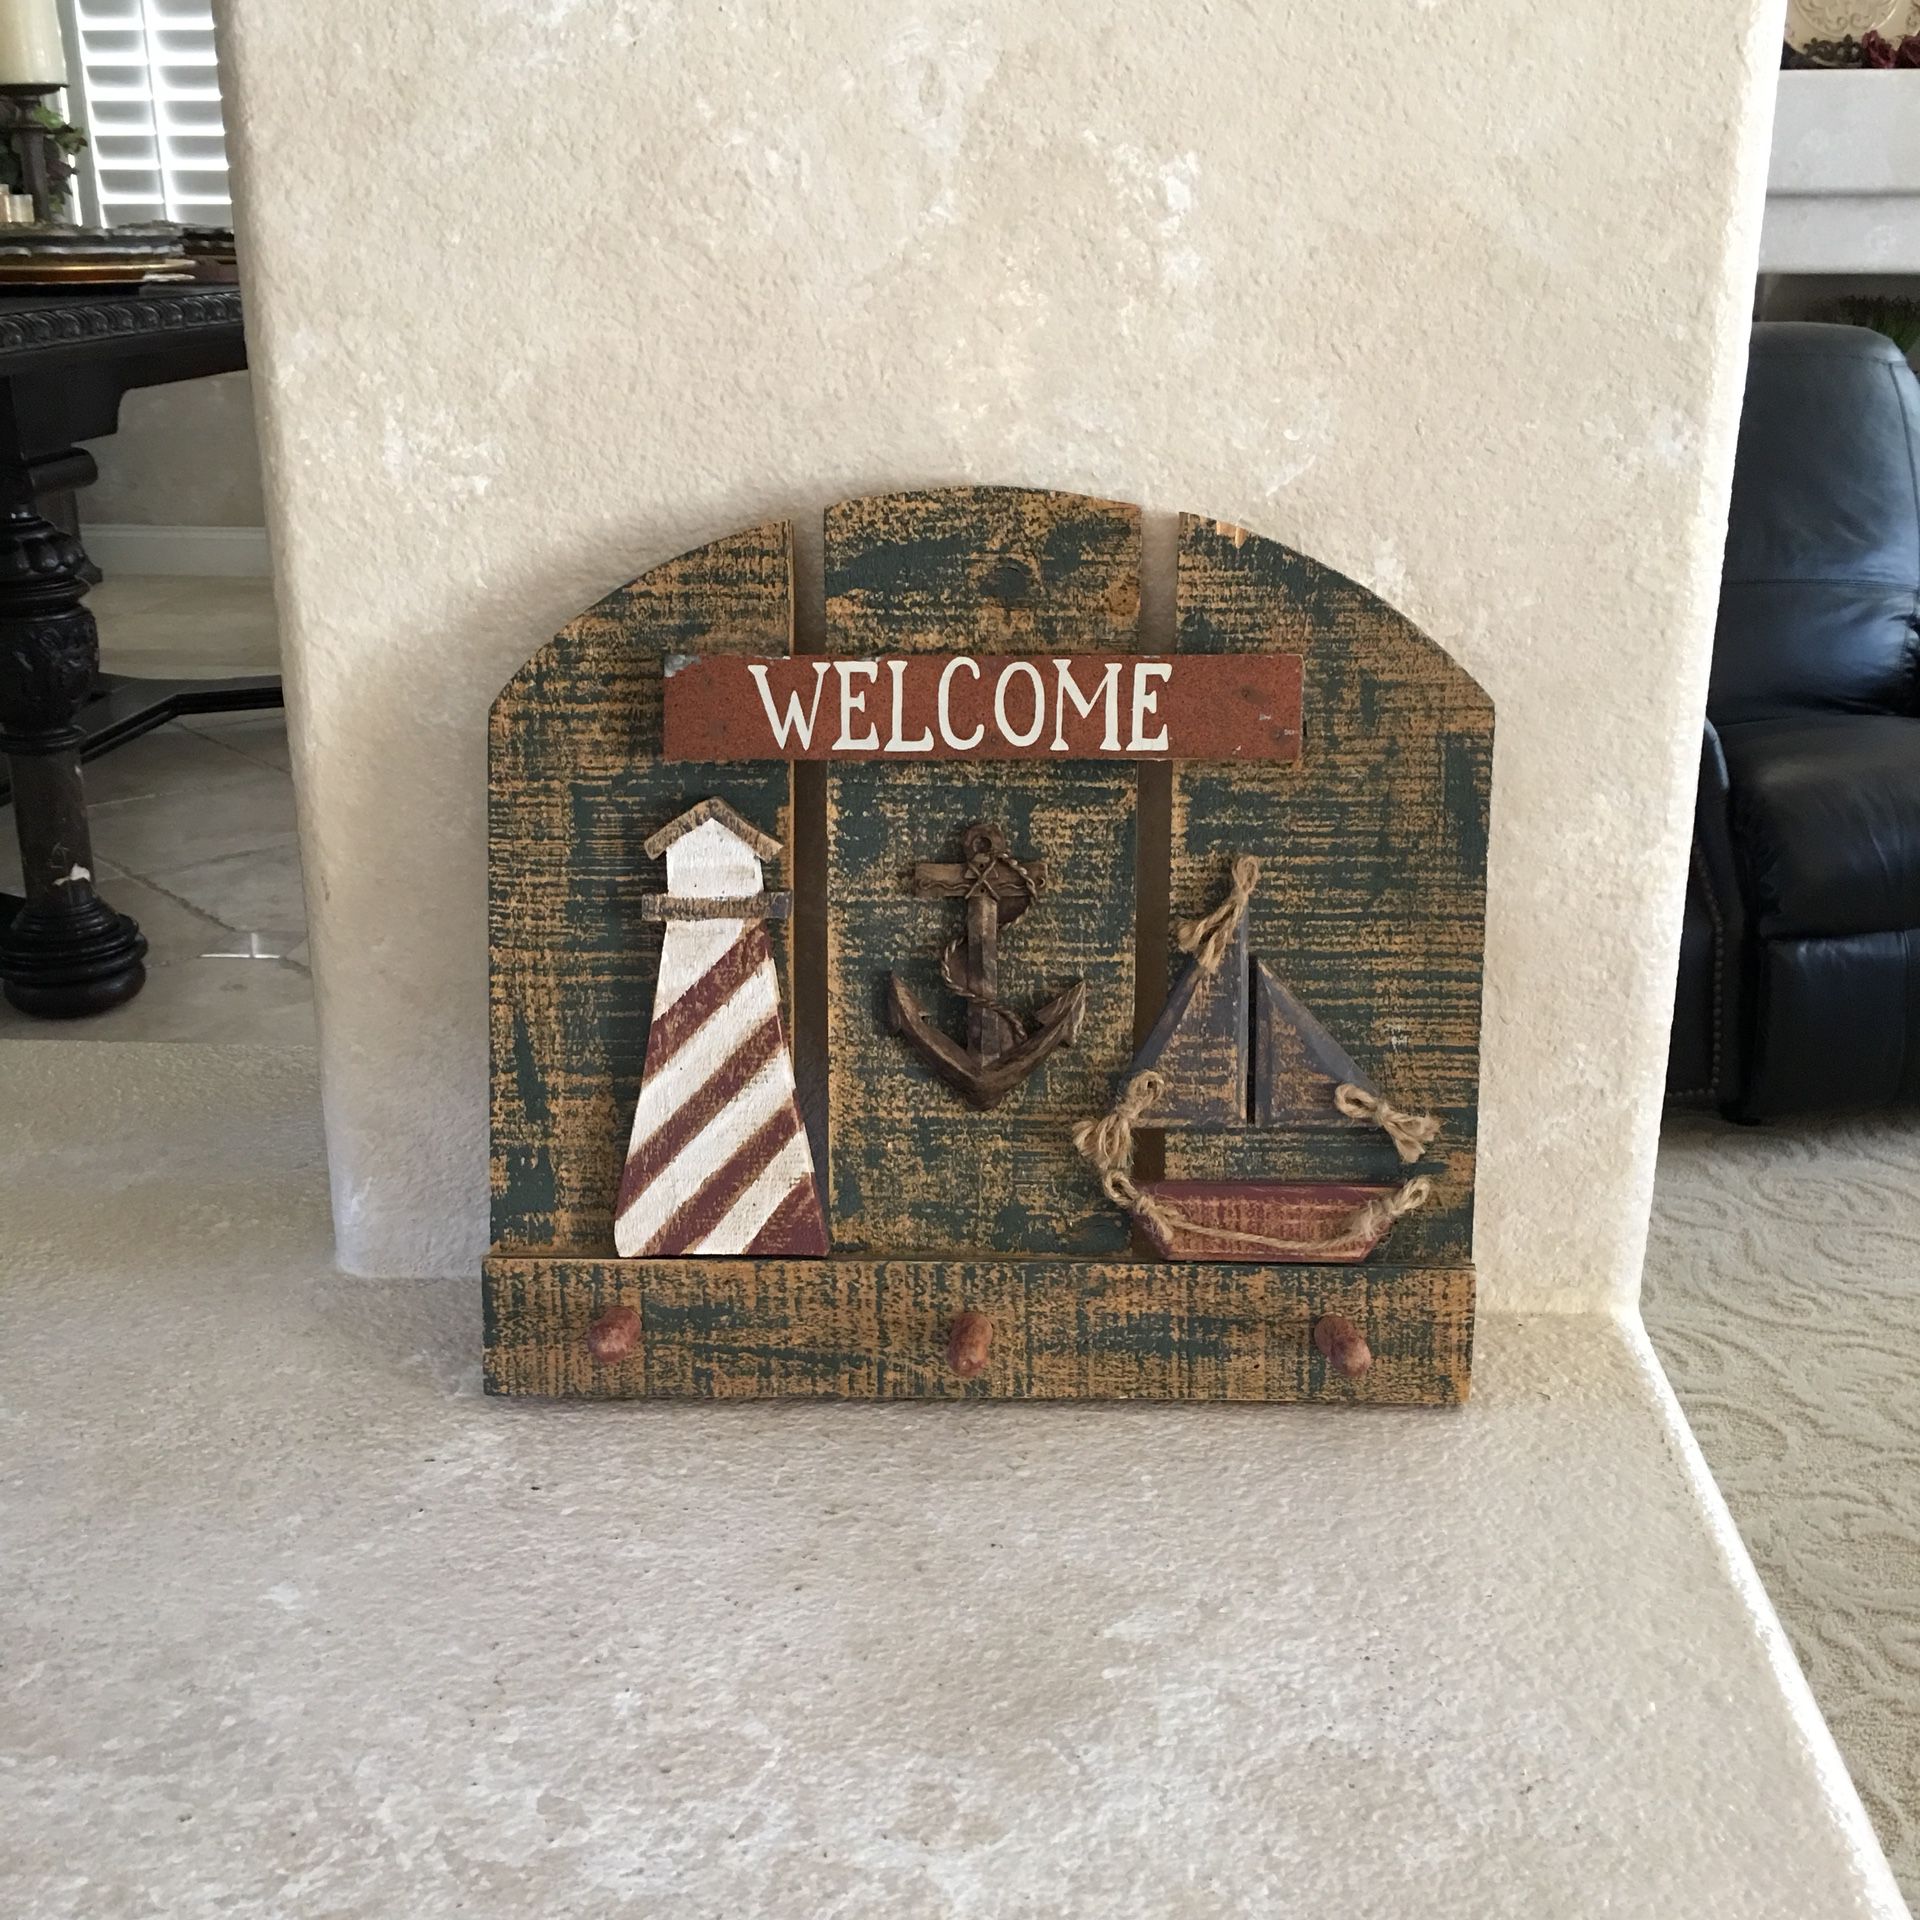 (30% off pick NAUTICAL 13.75” x 12"x1” Wood WELCOME SIGN Distressed LIGHTHOUSE+SAILBOAT+ANCHOR